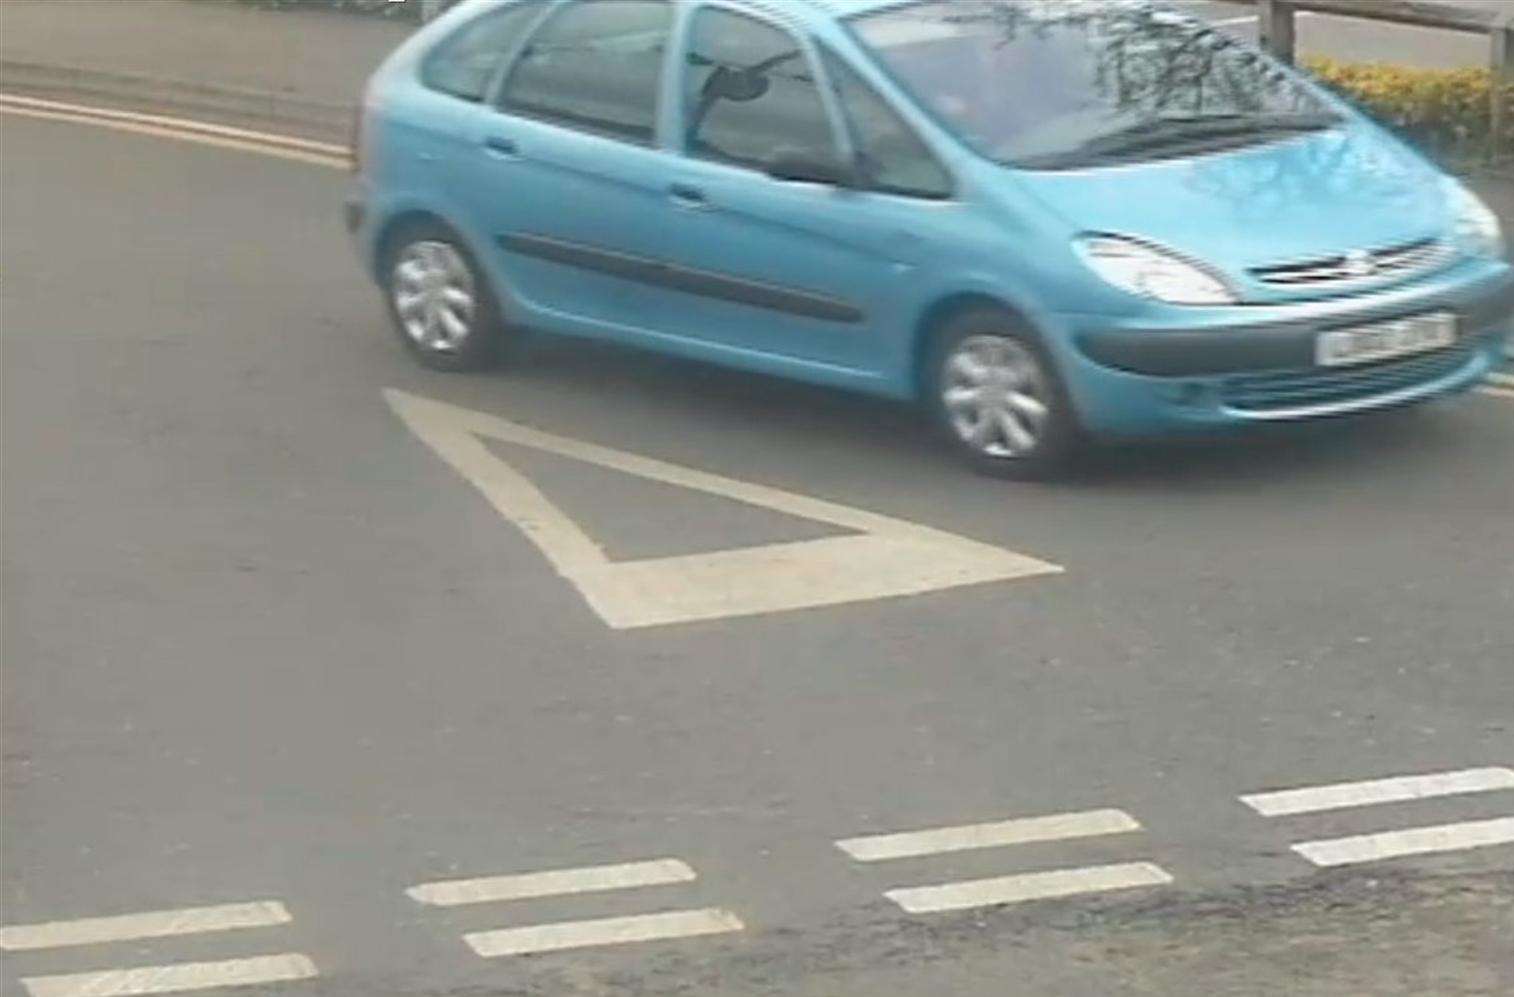 The pair escaped in this Citroen Picasso.